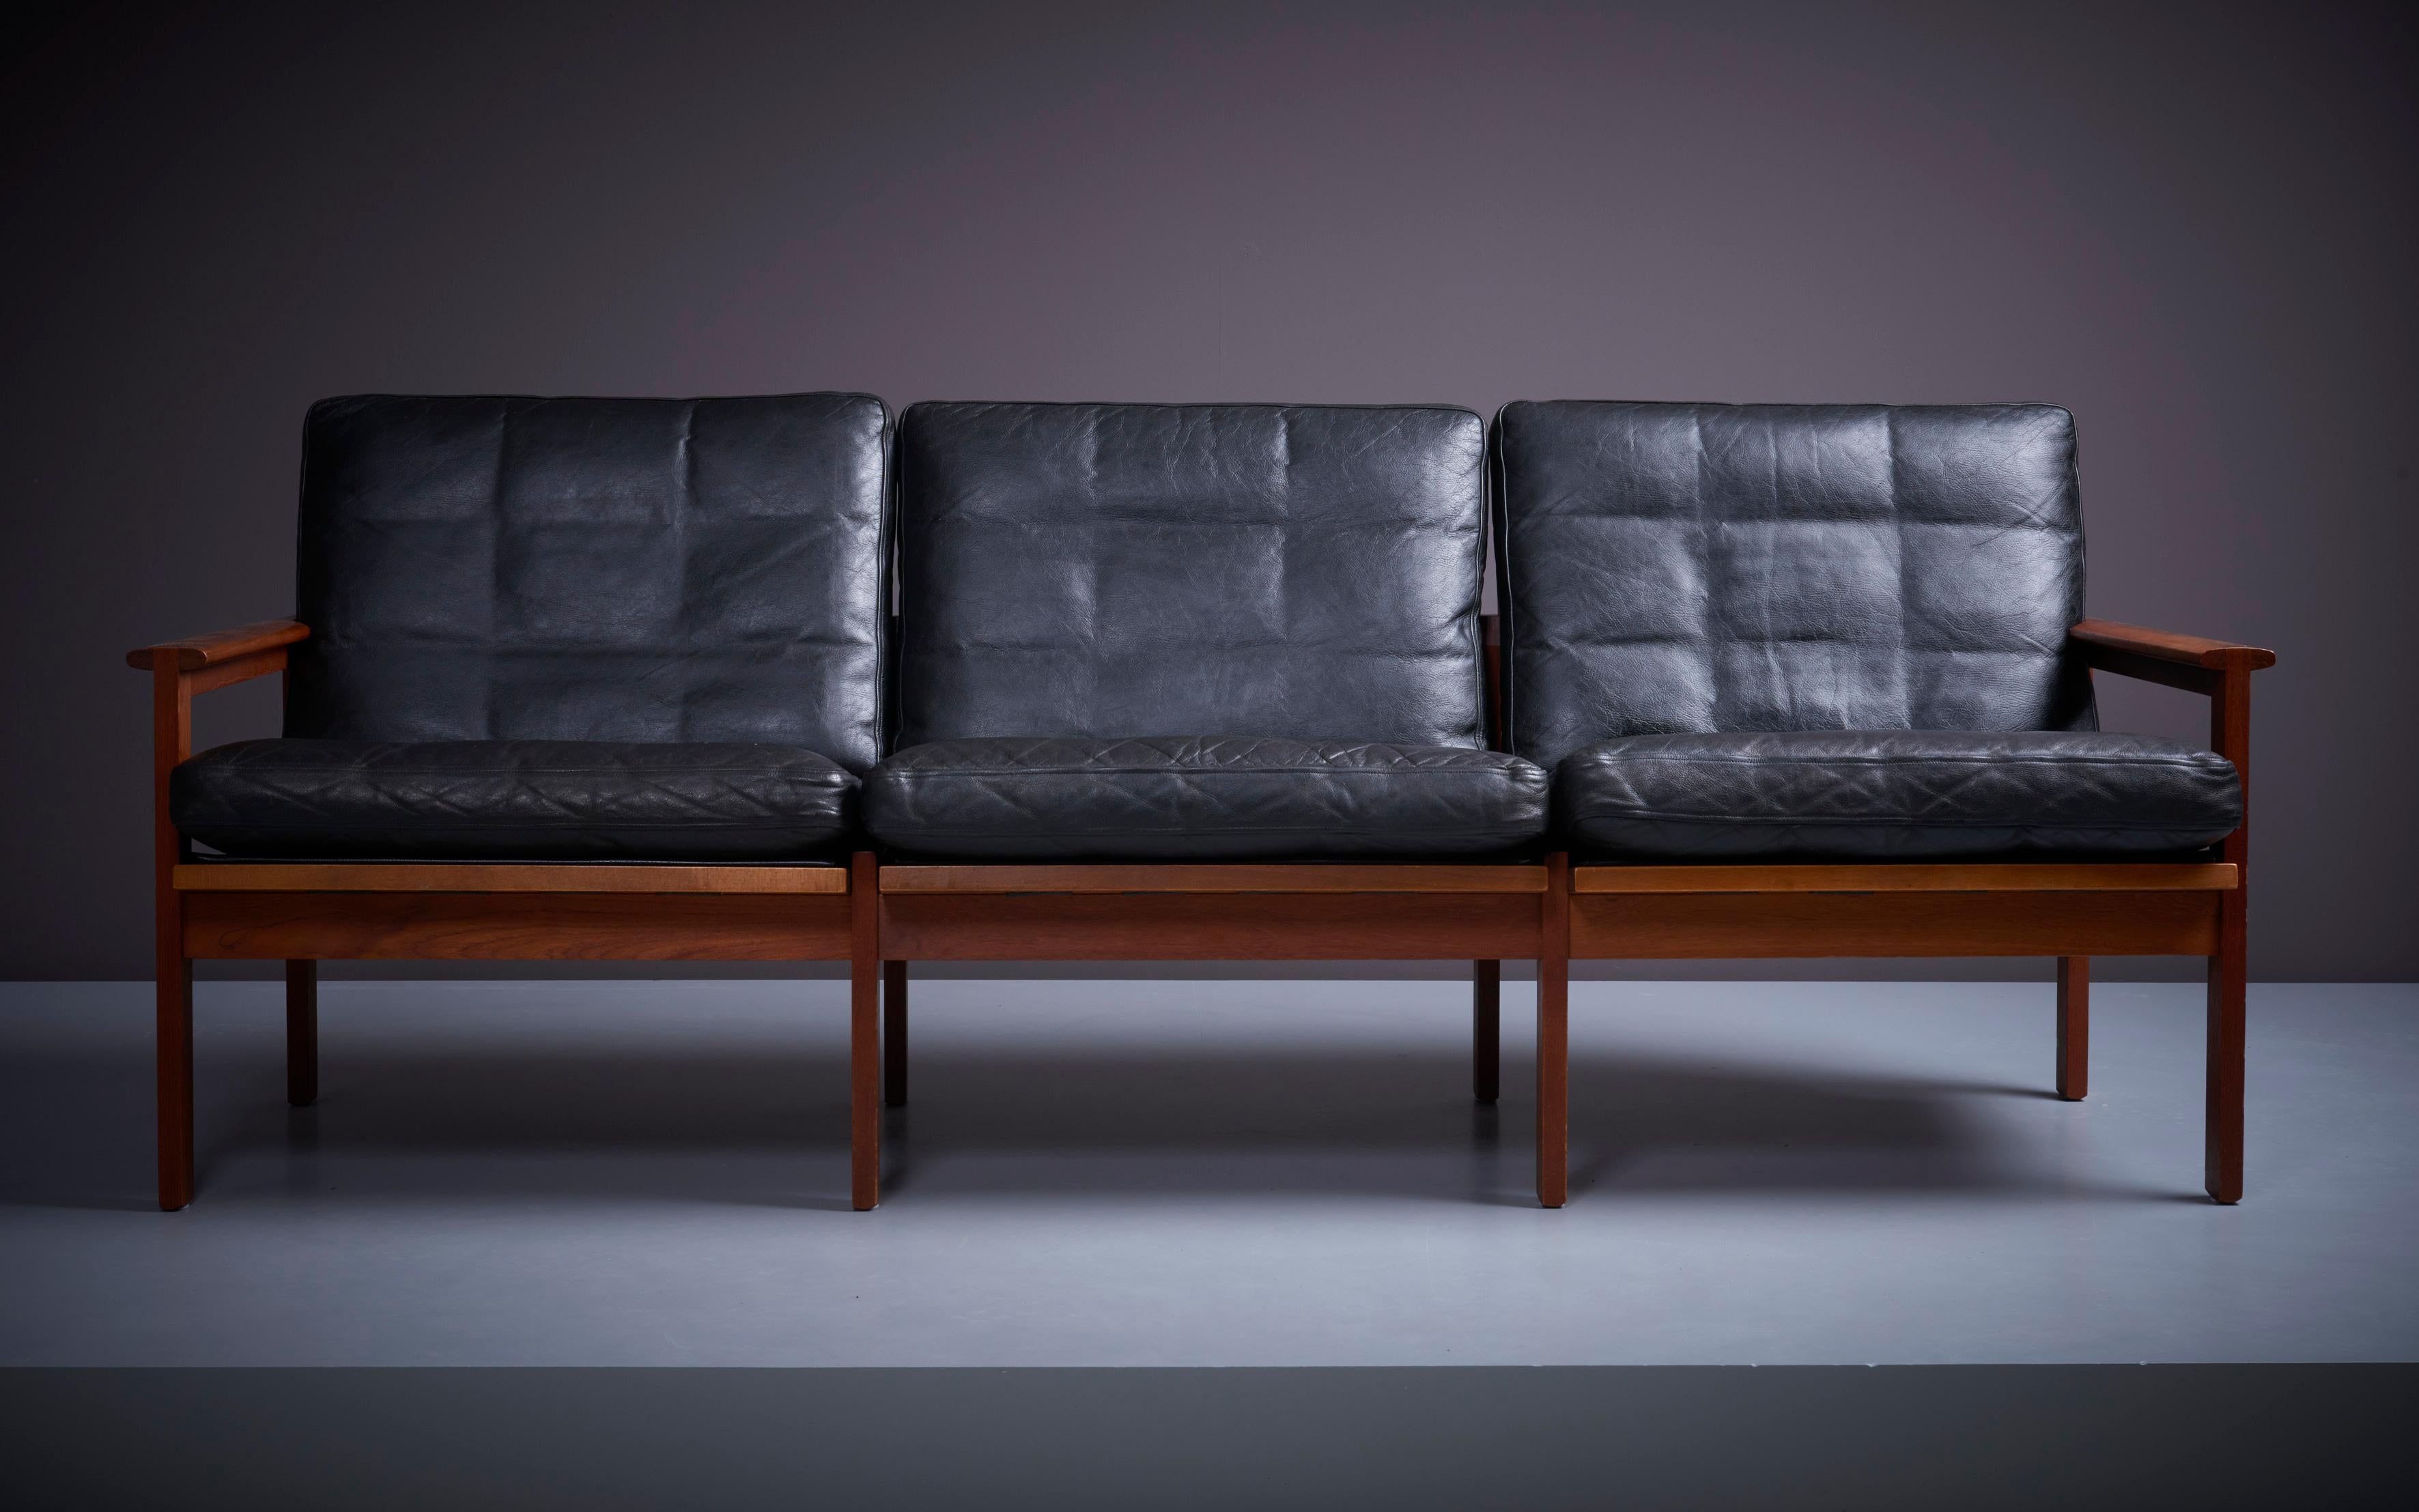 Illum Wikkelso 'Capella' Set of 2x Black Leather Sofa & Side Table Denmark 1960s For Sale 1